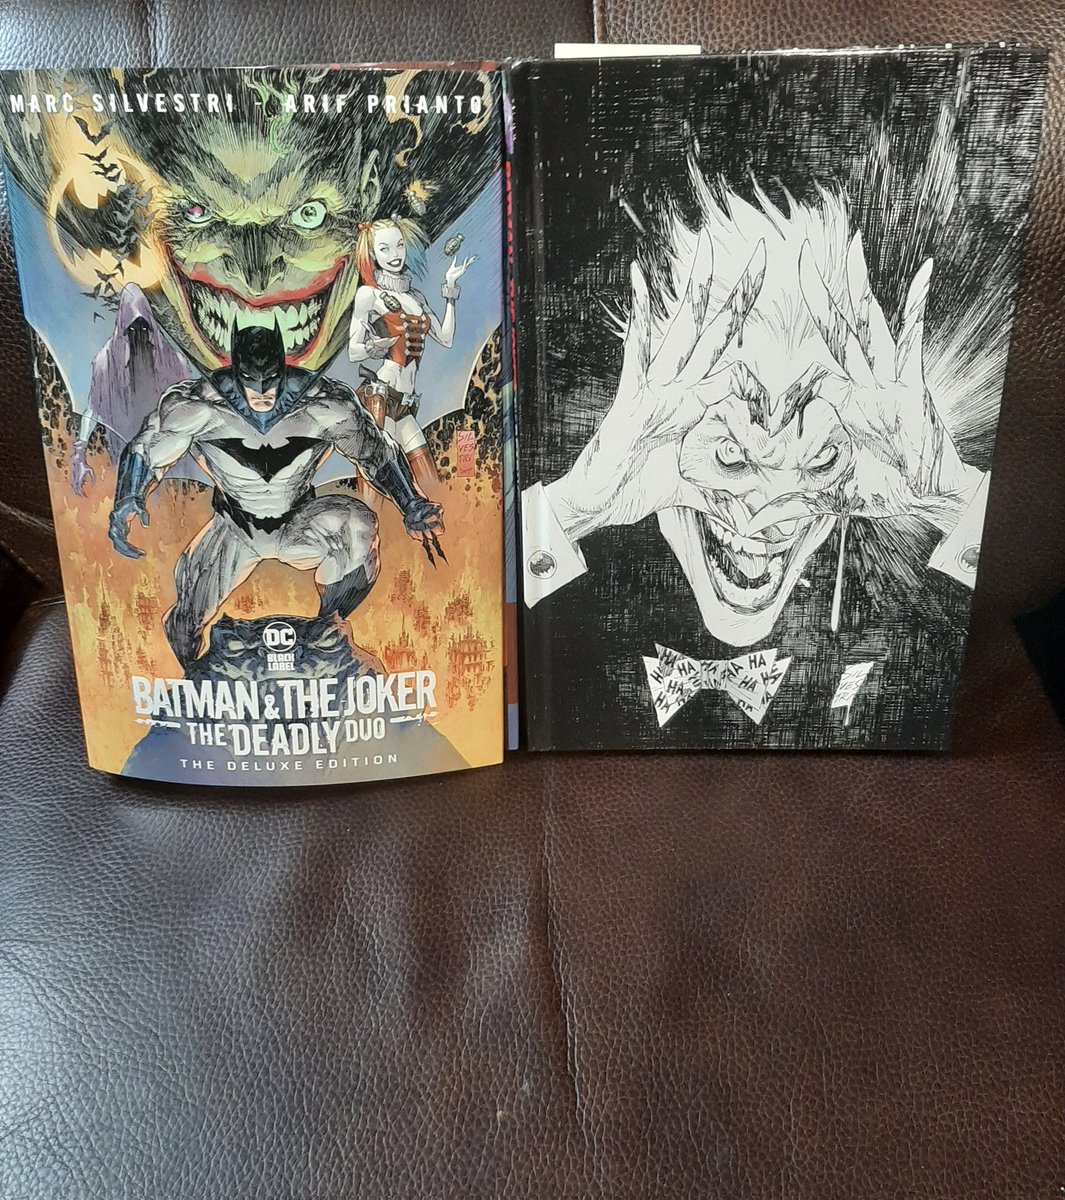 Just finished Batman & Joker: The Deadly Duo. What a hardcover! 🦇 DC did it right with this collection, giving you glorious black and white Silvestri art in the back of the book and on the inside cover. #DCcomics #Batman